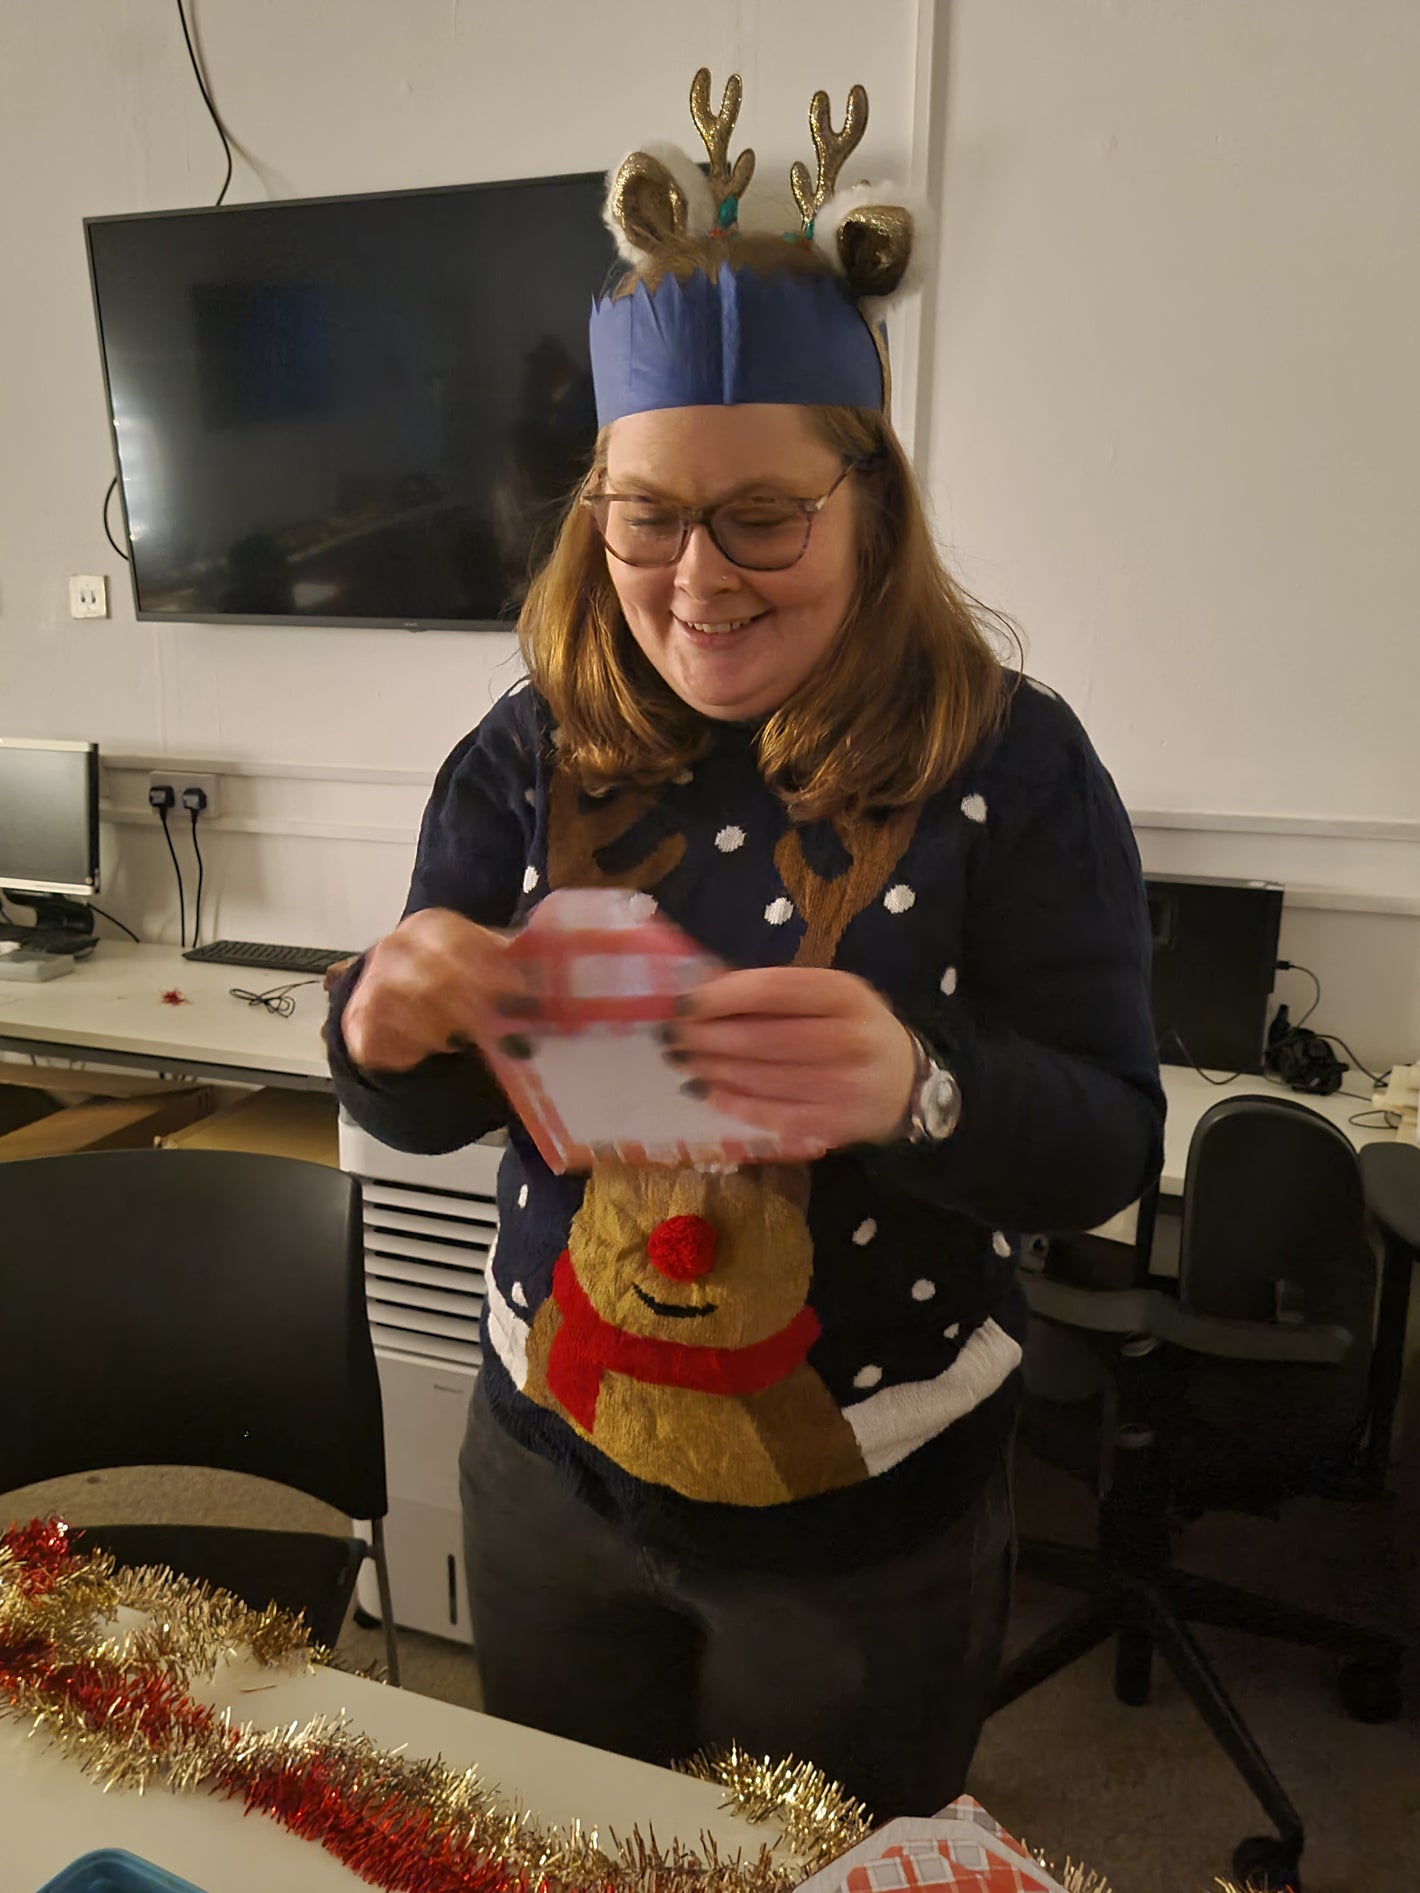 Staff member dressed up in Christmas attire sealing a Christmas card.